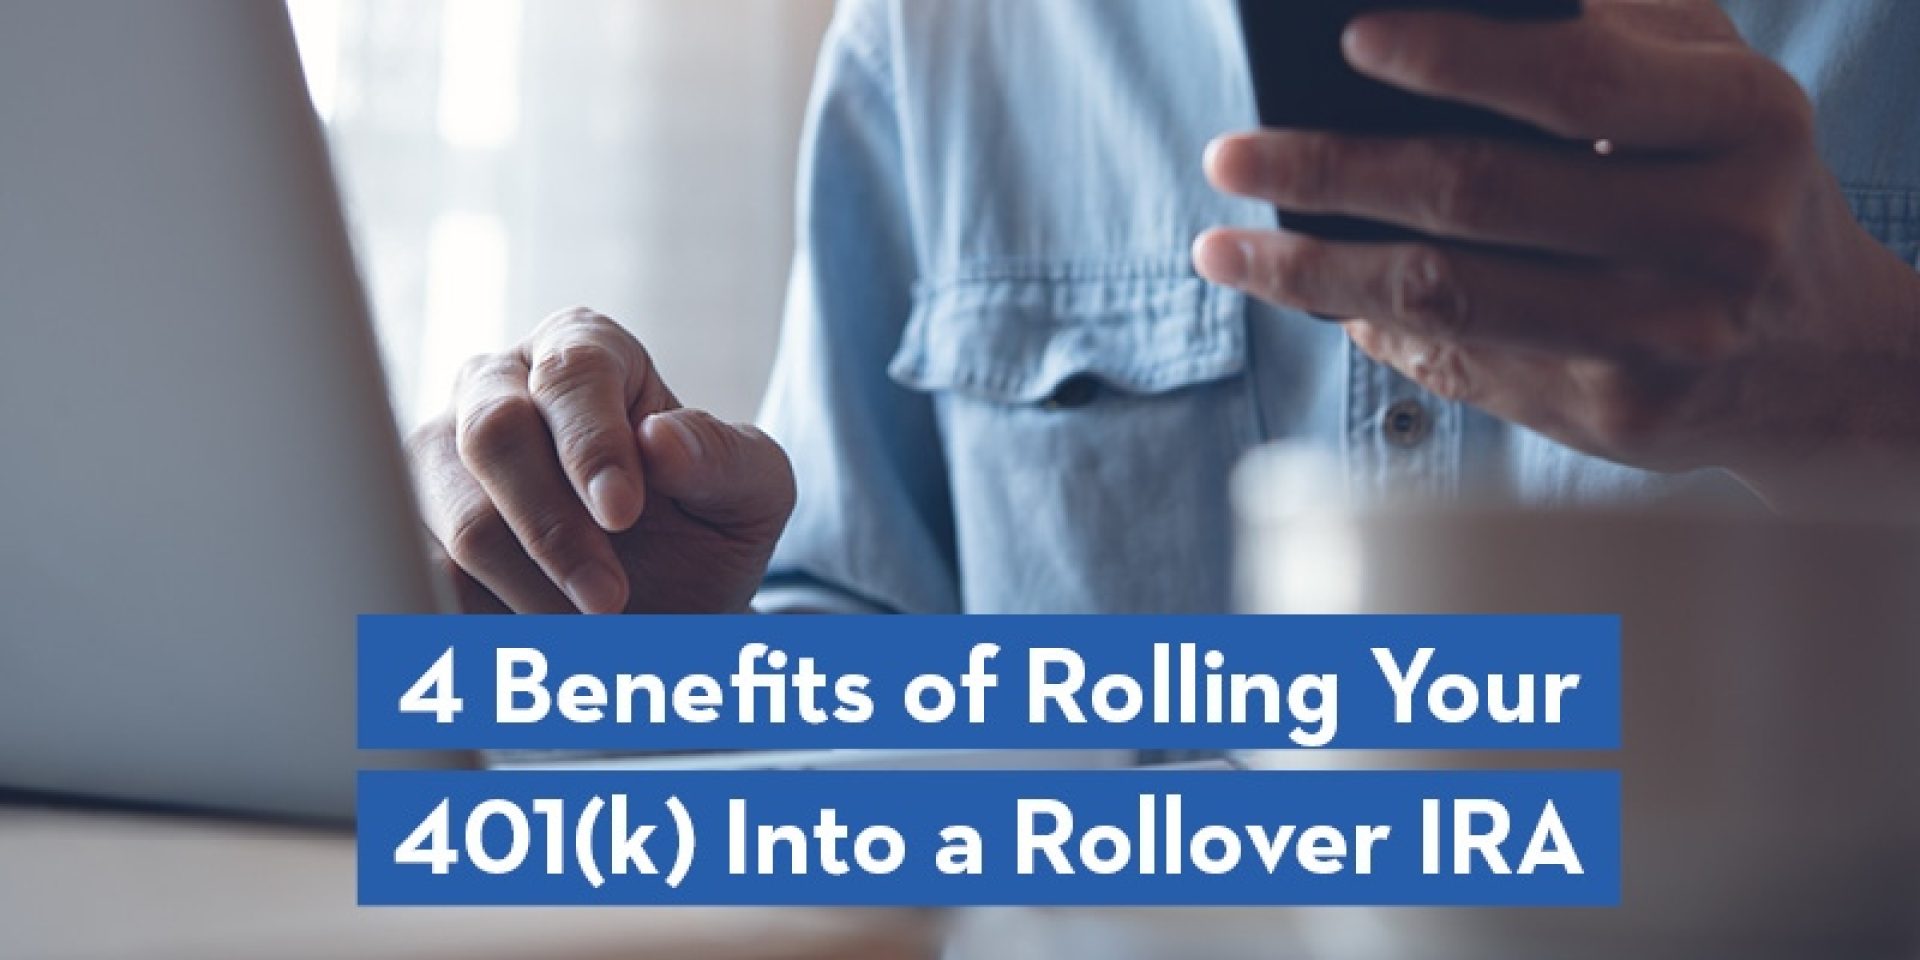 What Does Making Informed Rollover Decisions Mean?